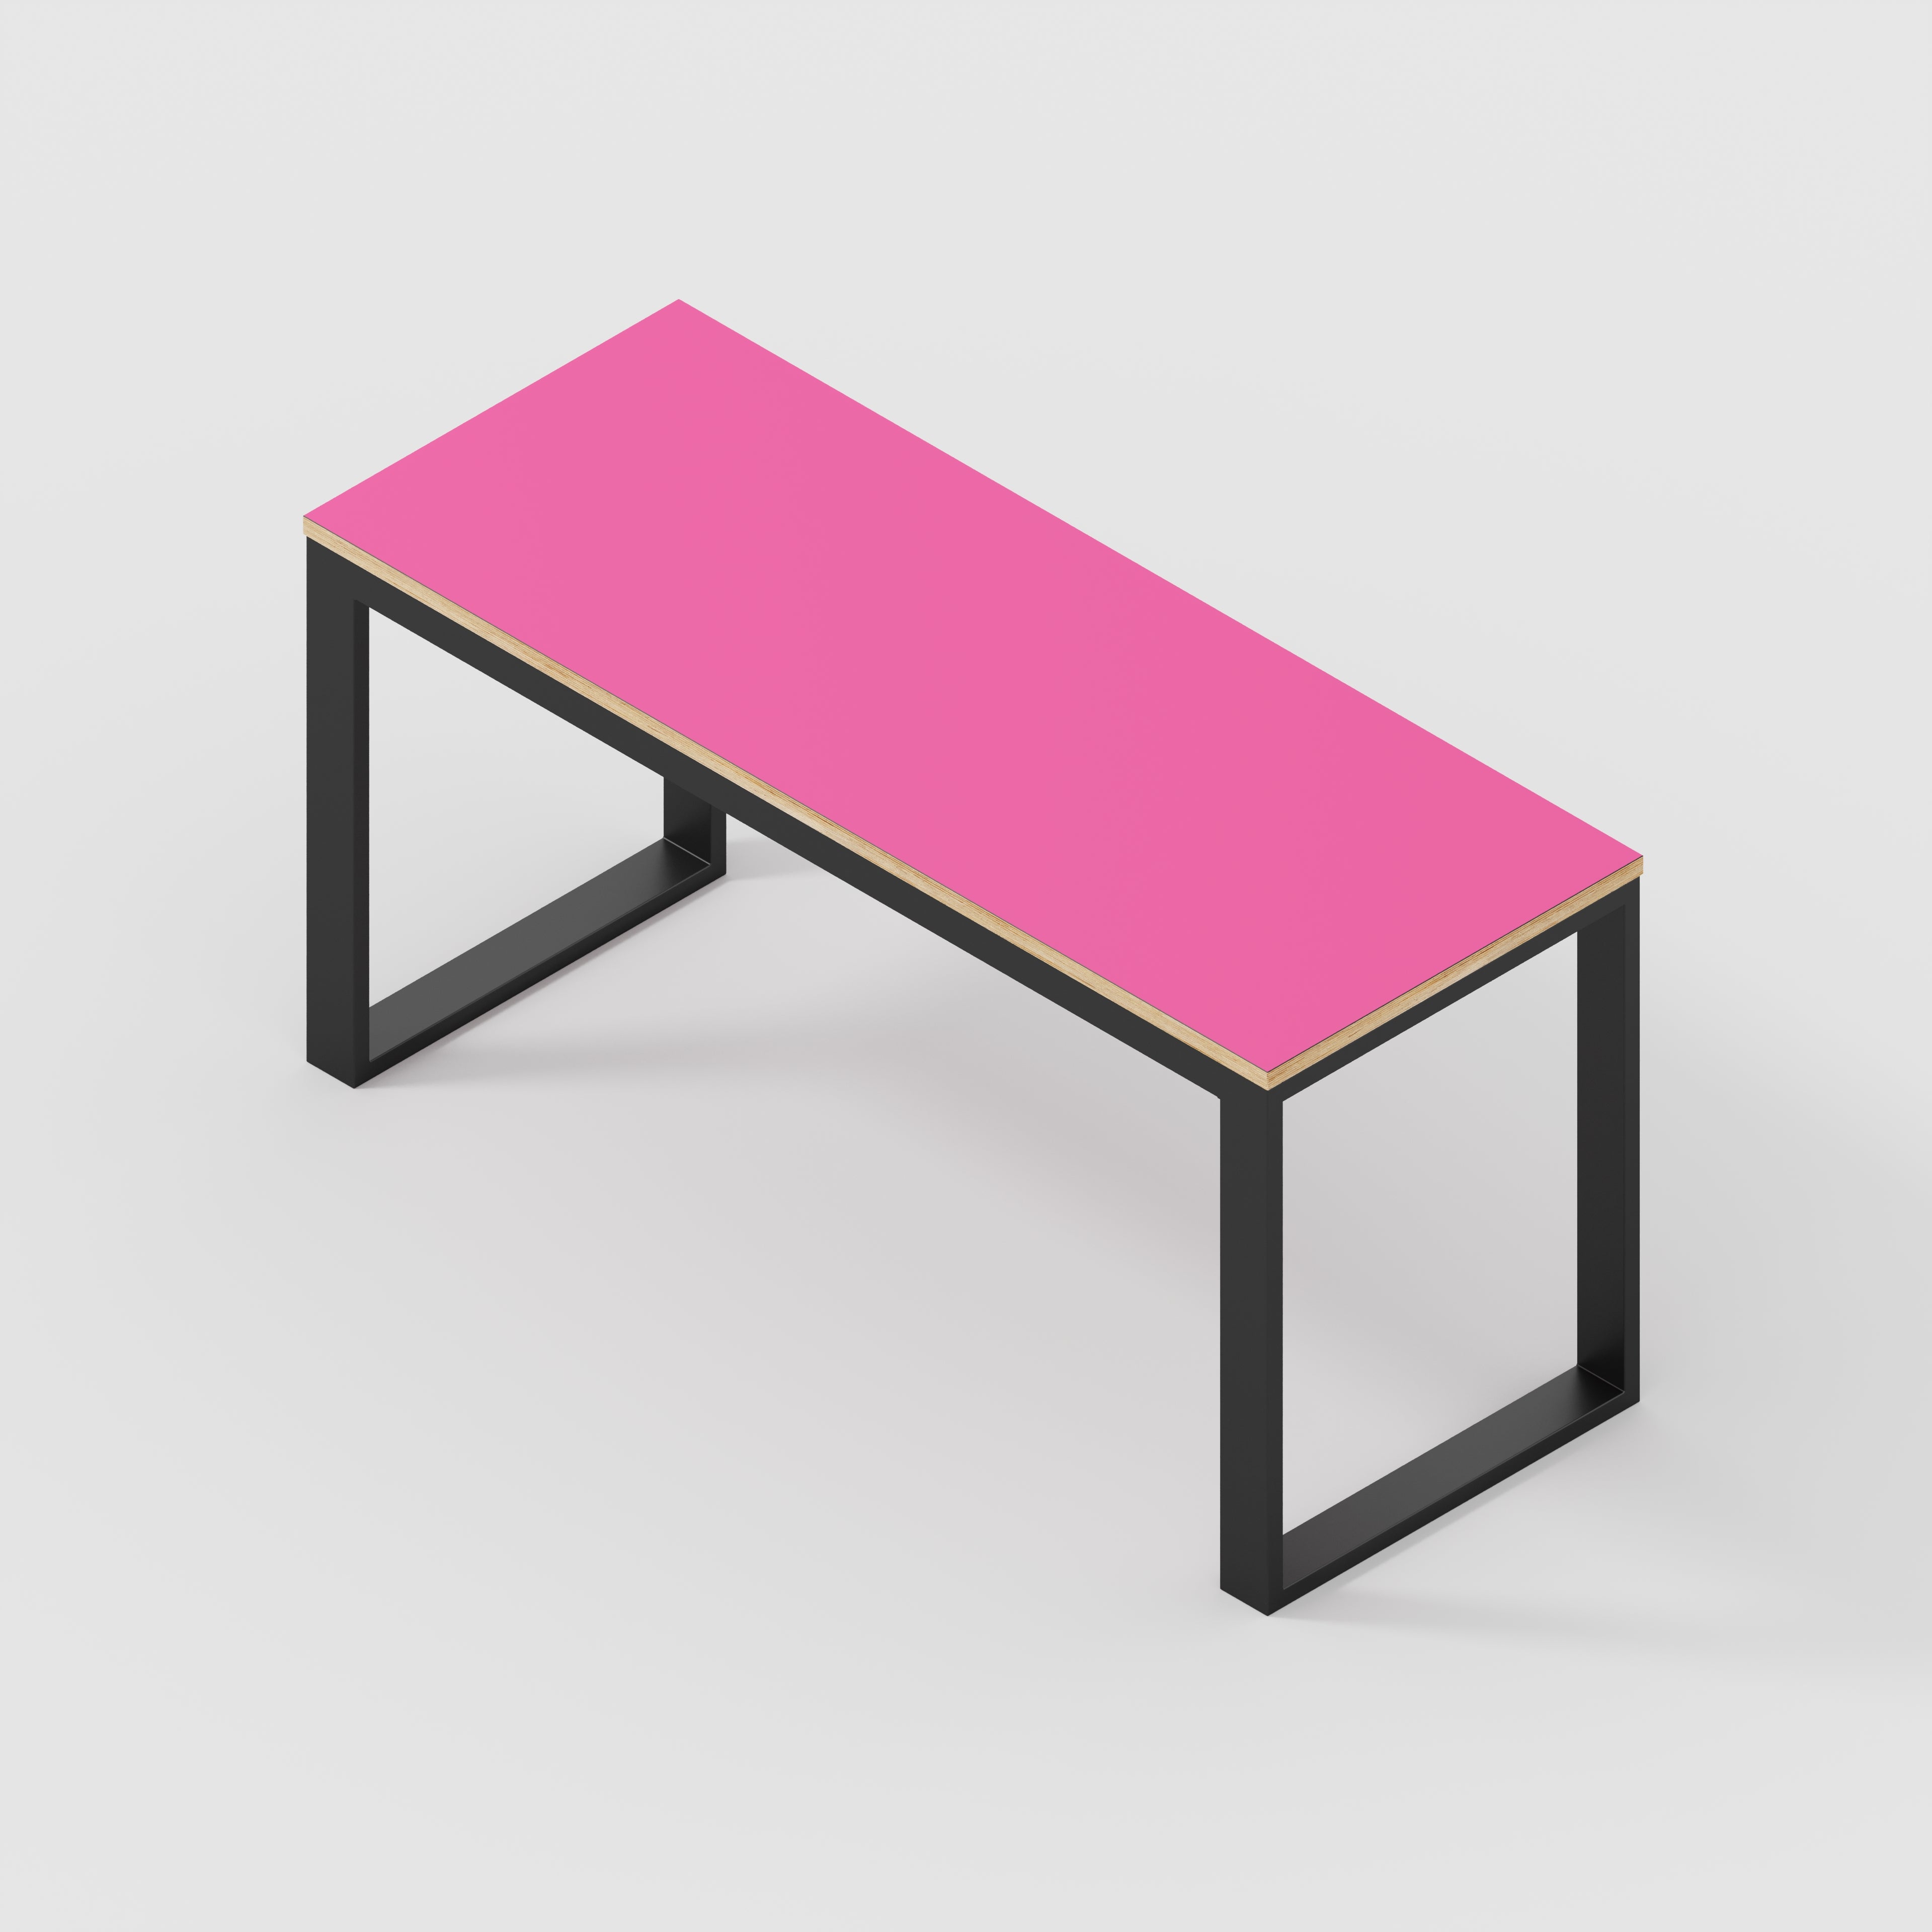 Desk with Black Industrial Frame - Formica Juicy Pink - 1500(w) x 585(d) x 735(h)